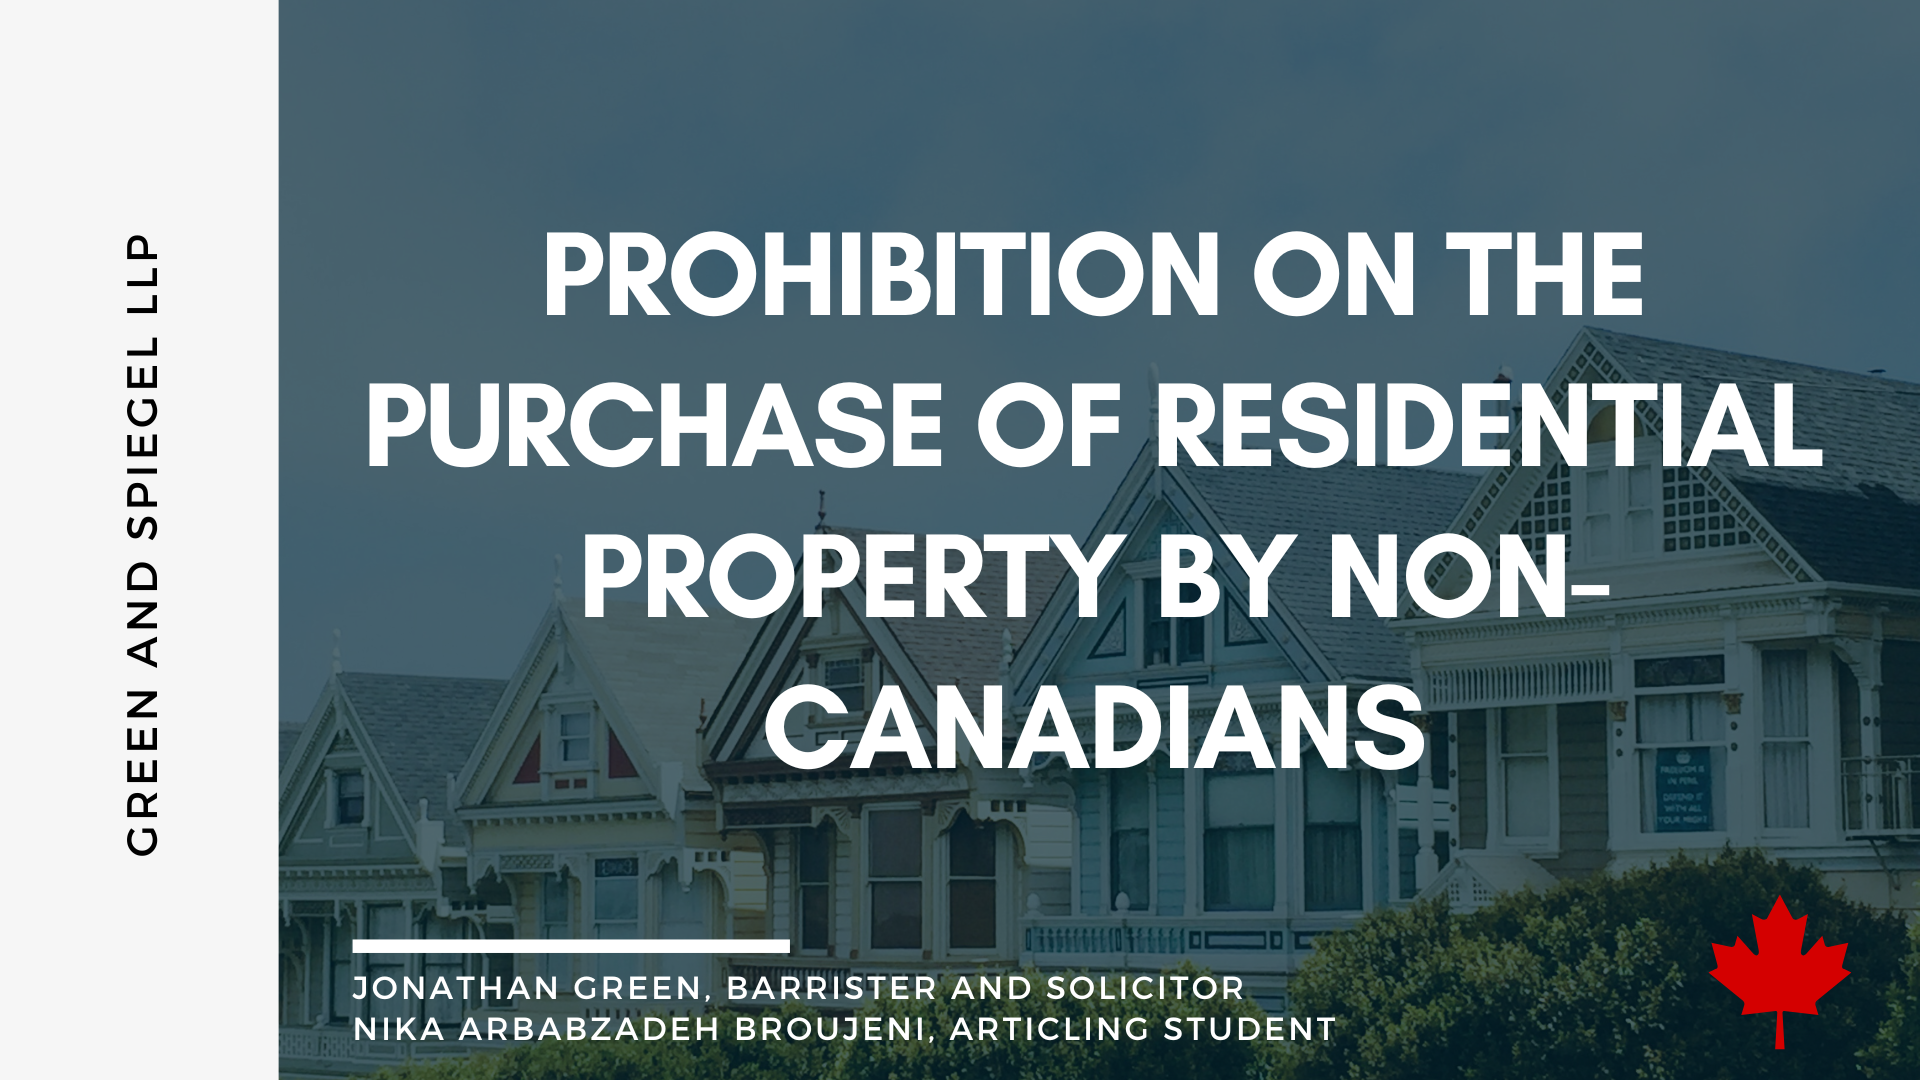 PROHIBITION ON THE PURCHASE OF RESIDENTIAL PROPERTY BY NON-CANADIANS